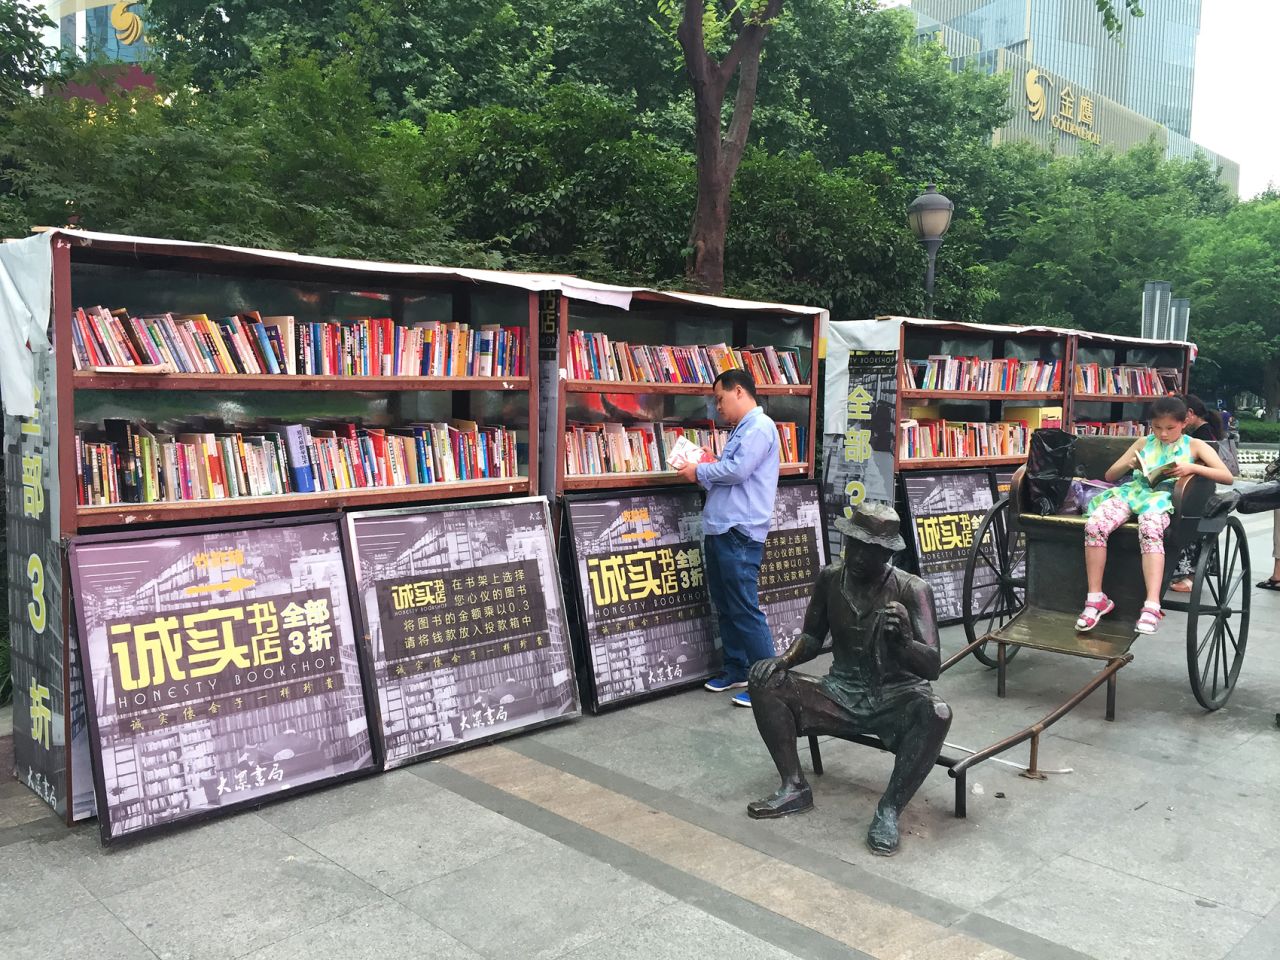 Popular Bookmall, which operates eight bookstores in China, runs a streetside shop that operates under the honor system. The company hopes it will encourage locals to read more.